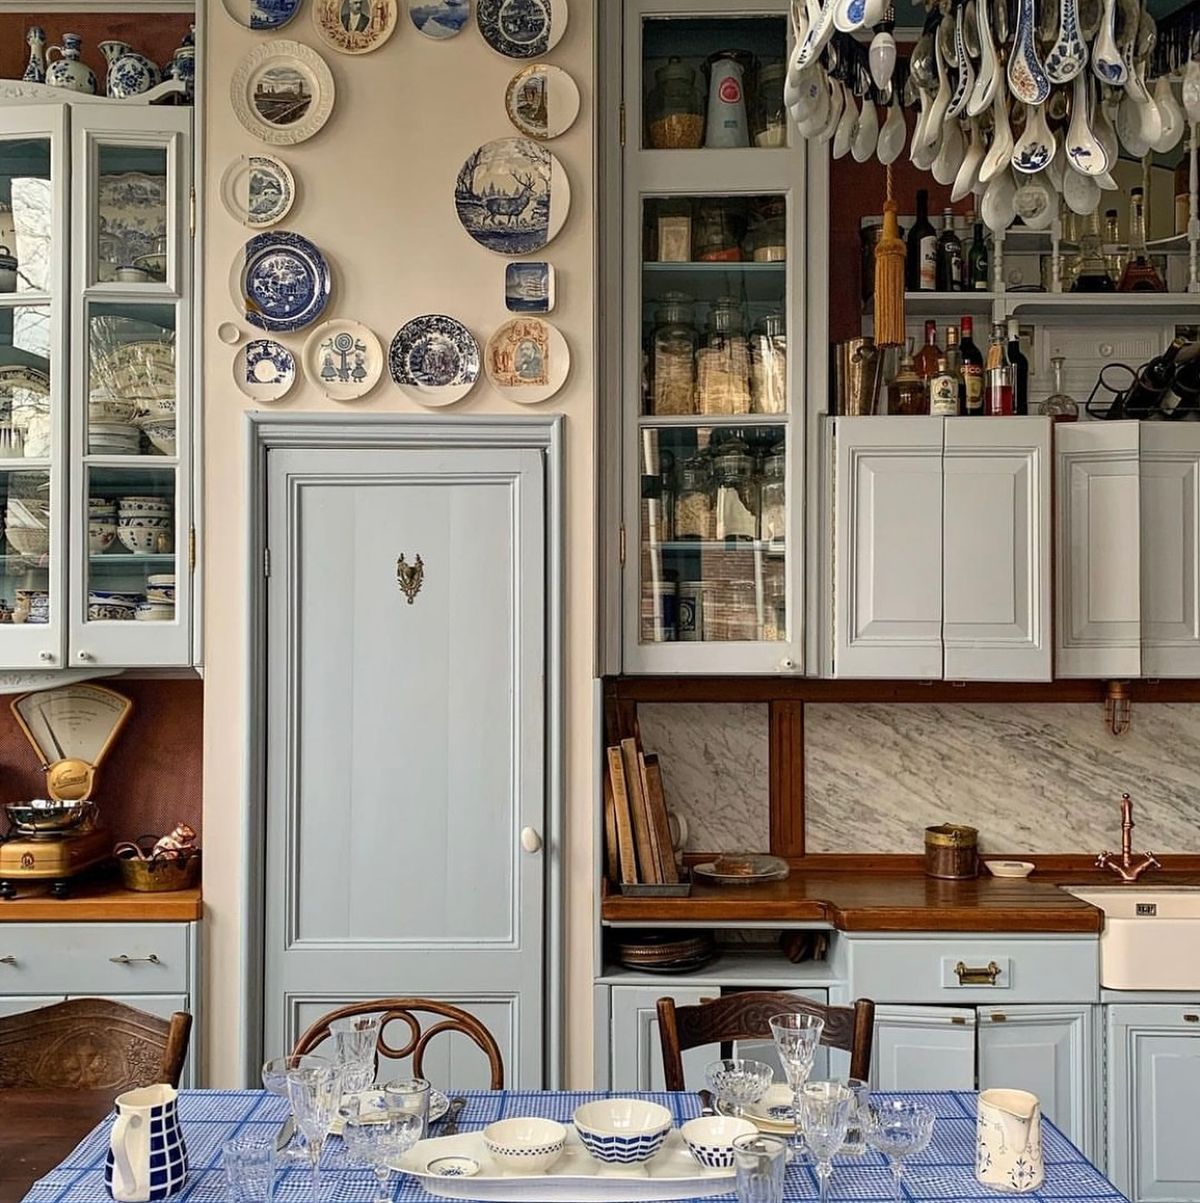 These 15 Kitchen Cabinet Decor Ideas Are Above and Beyond